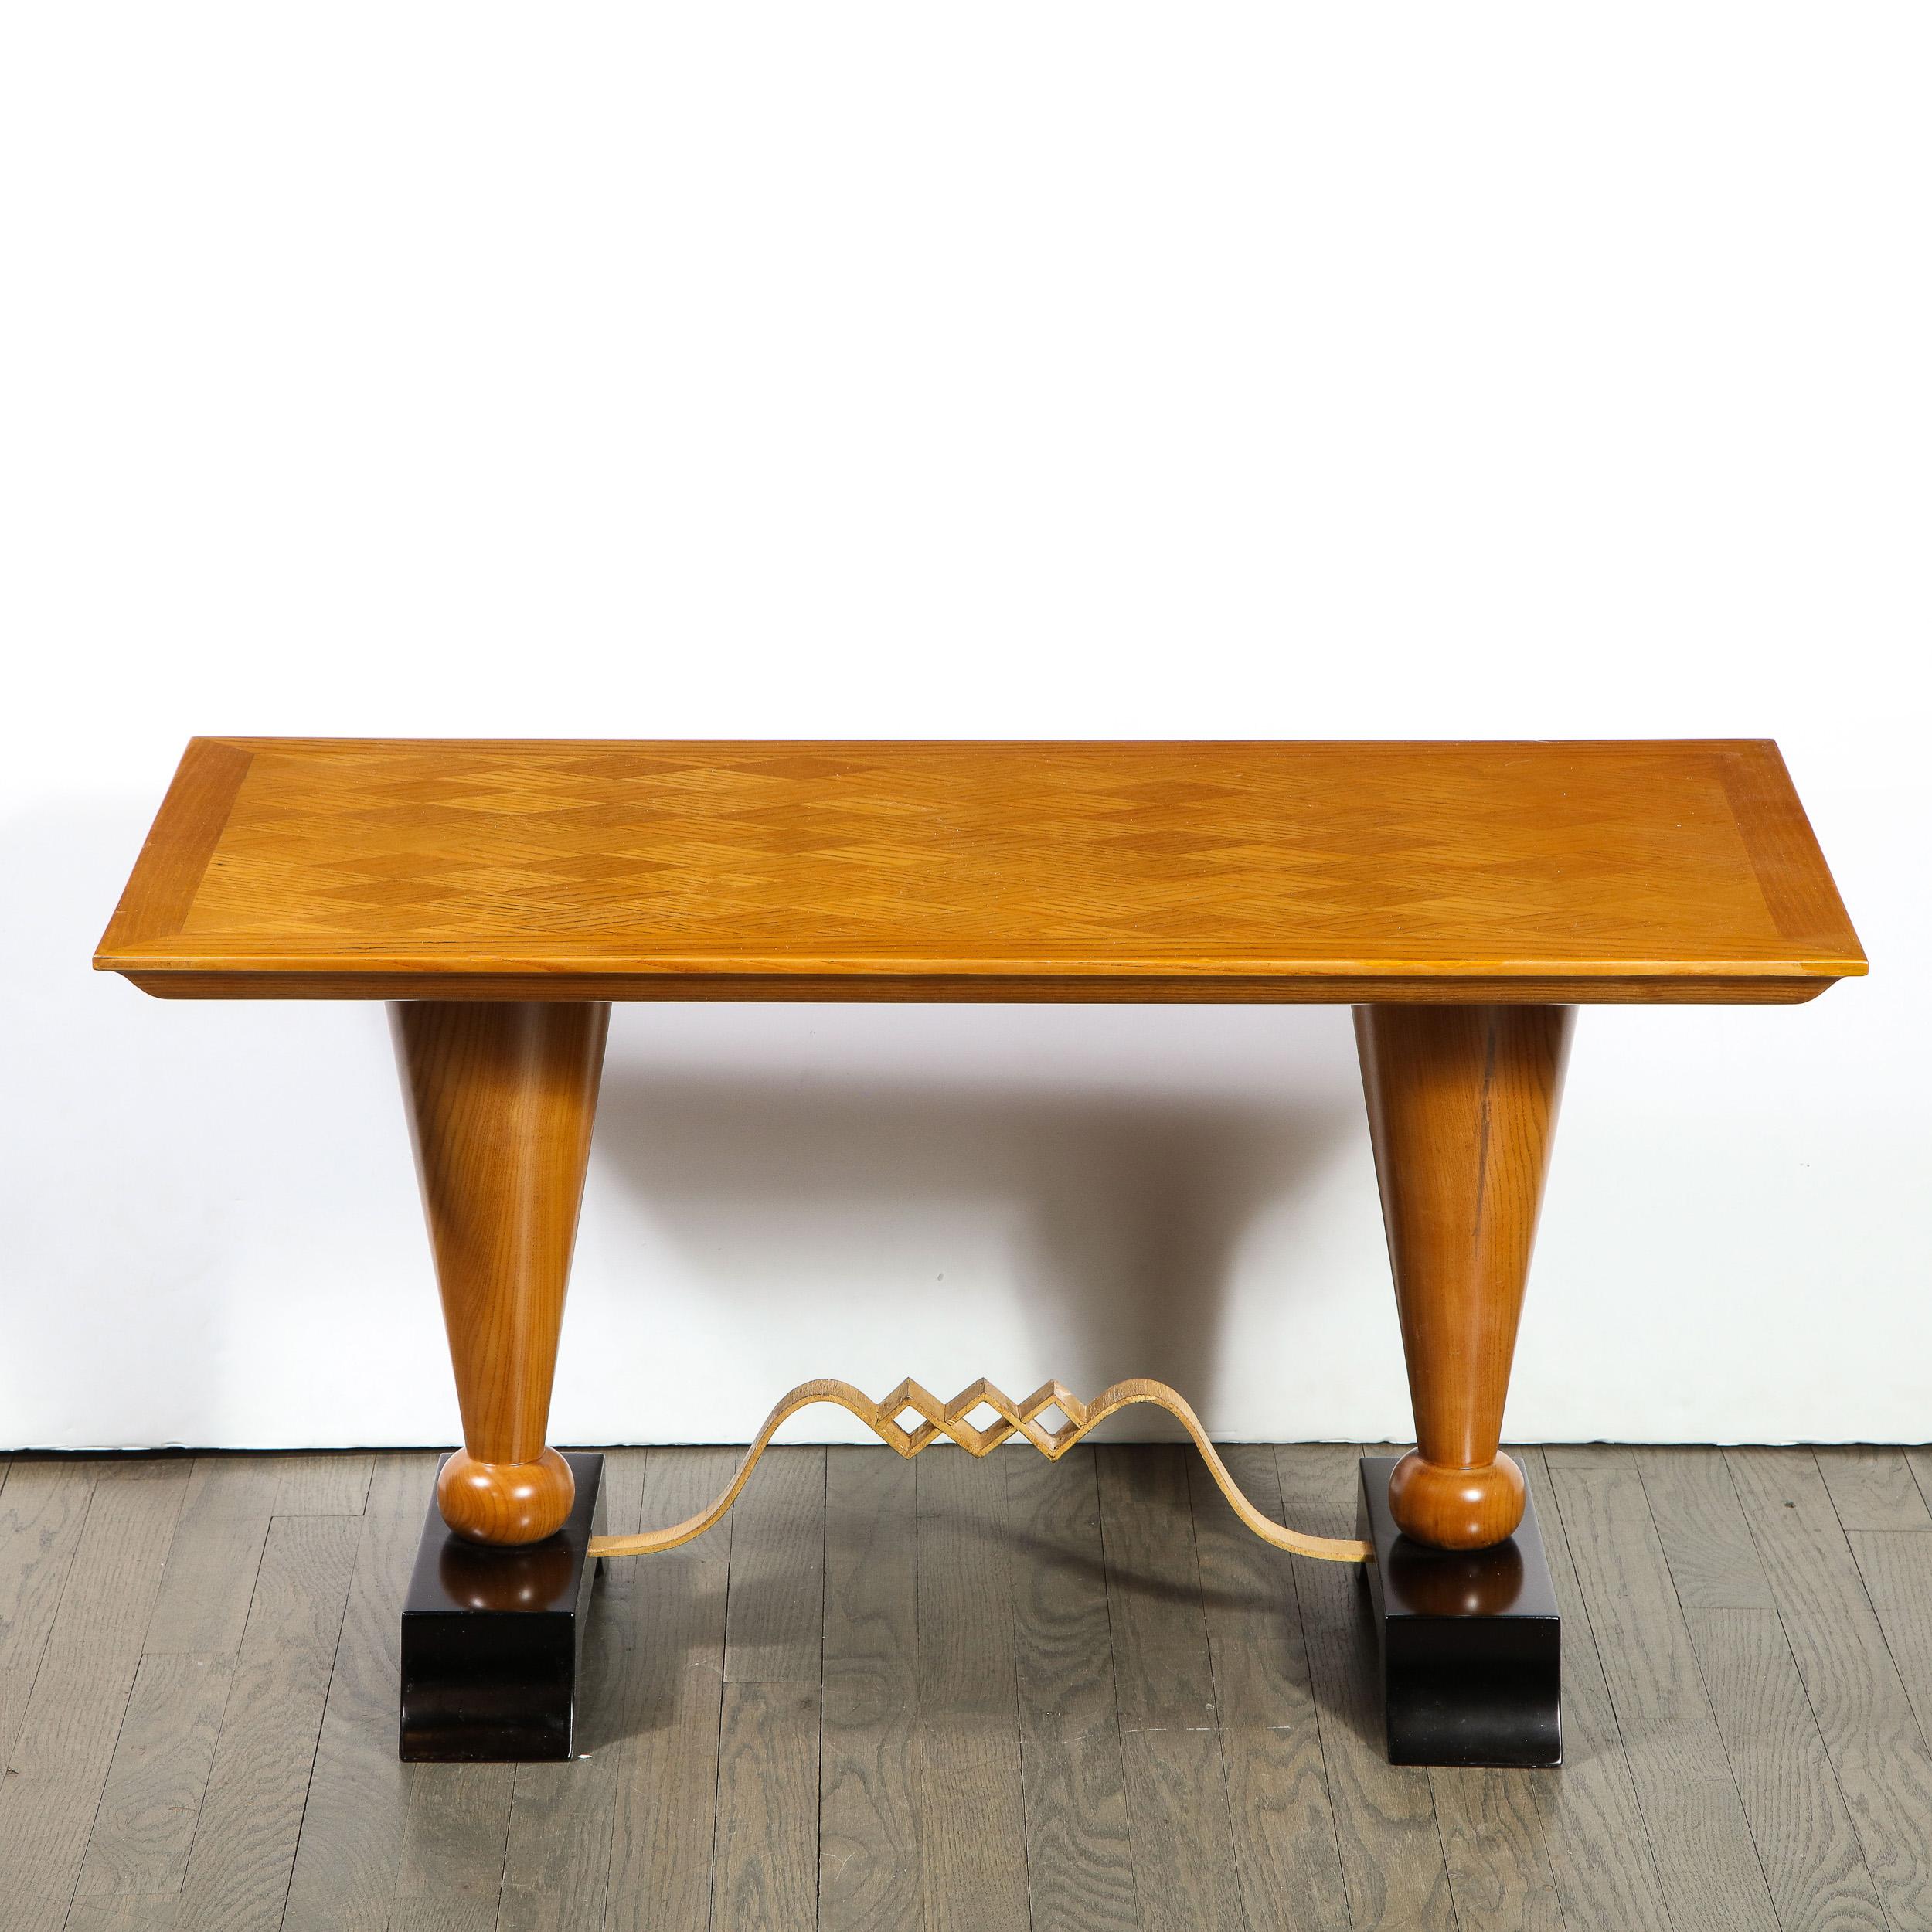 This elegant Art Deco cocktail table was realized in France, circa 1940. It features a rectangular blonde sycamore top with diamond form bookmatching in which the woodgrain of the walnut panels meets at perpendicular angles creating a rhythmic